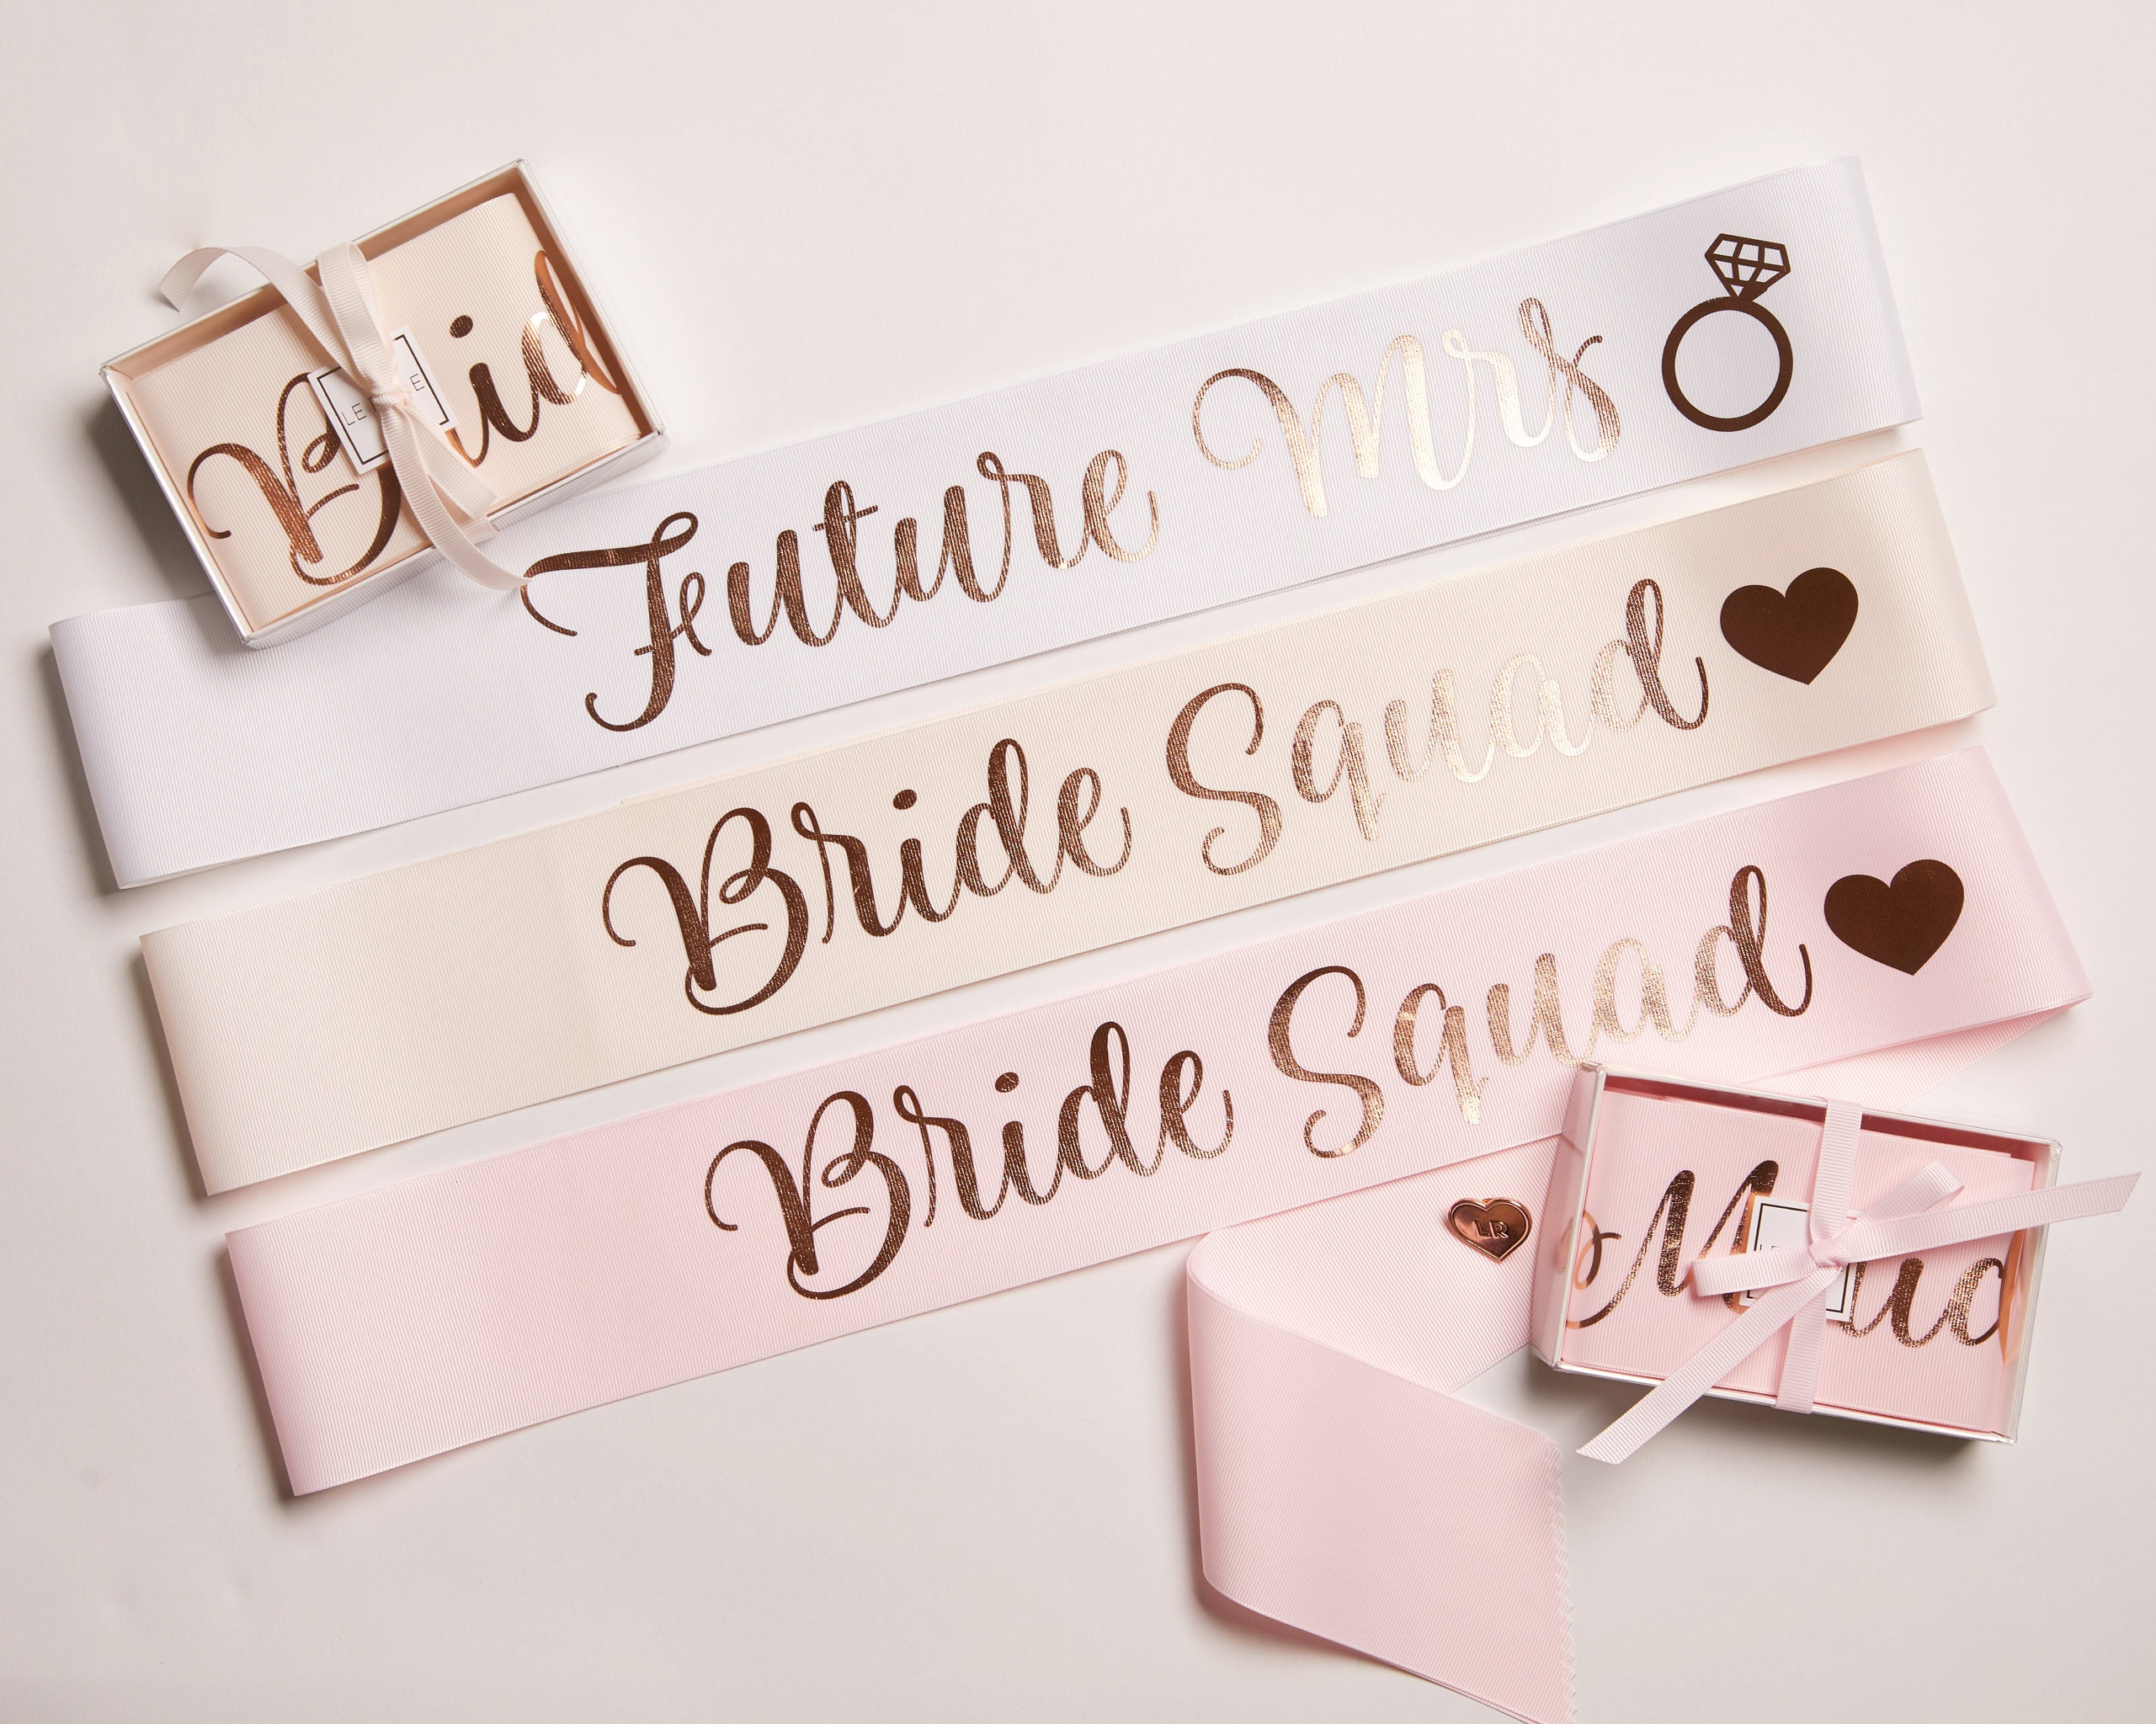 HEN PARTY SASH HEN NIGHT SASHES HEN DO SASHES PINK WITH BLACK WRITING 